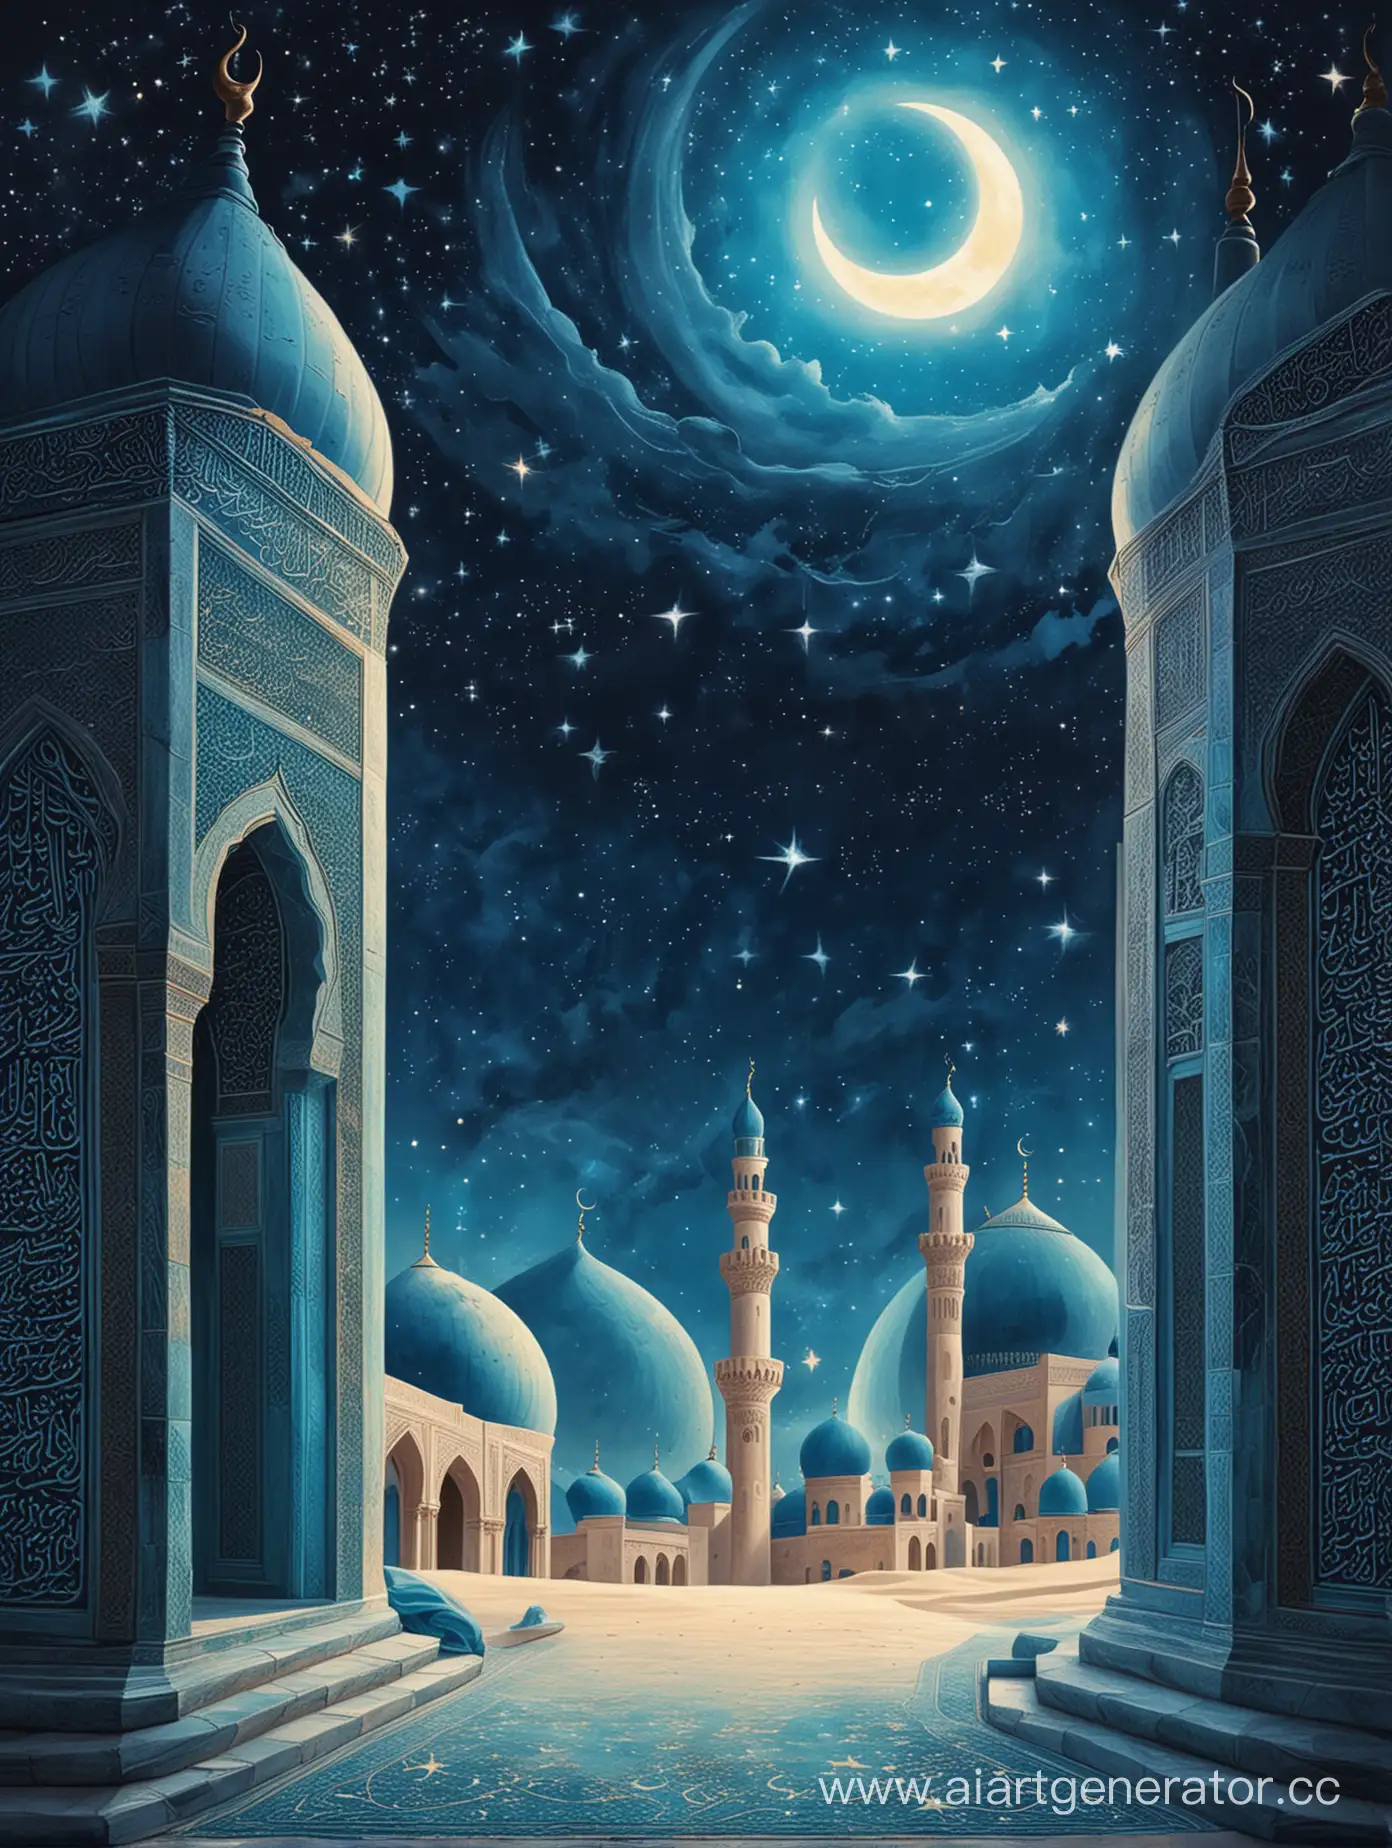 Ramadan scene with a crescent moon, minaret, mihrab, and stars, all depicted in shades of blue